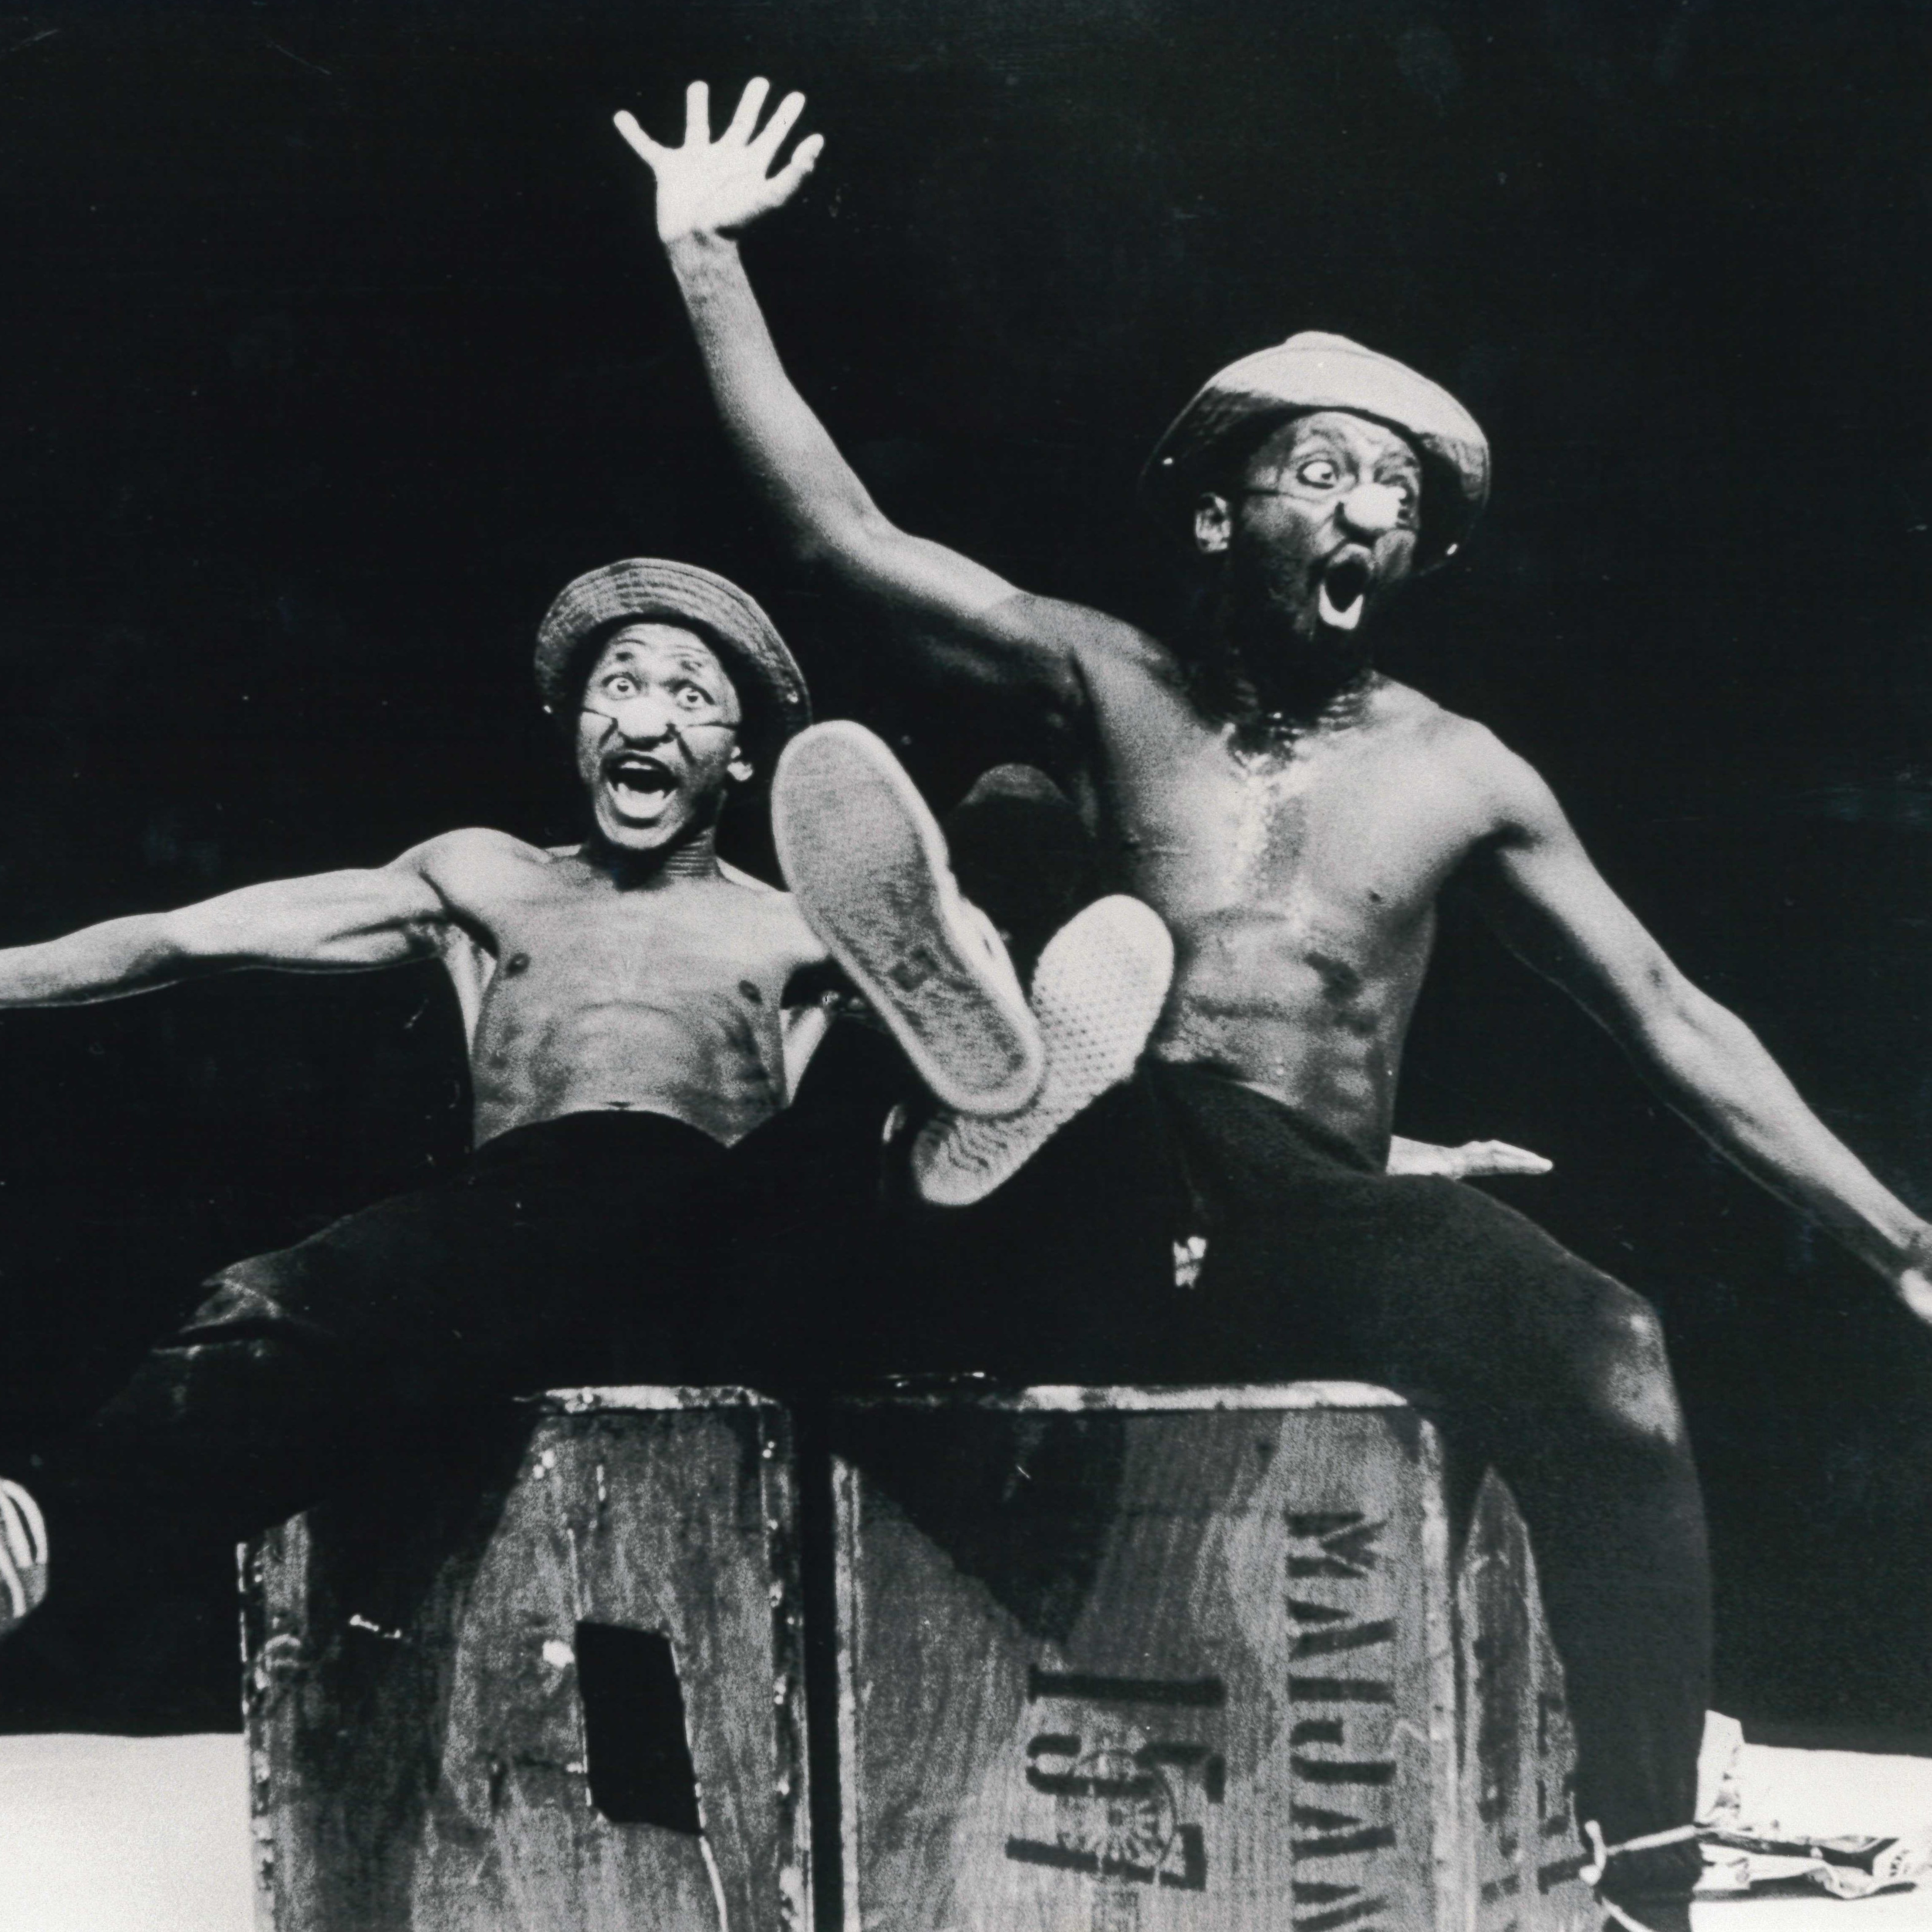 Black and white archival image of Percy Mtwa and Mbongeni June in Woza Albert On Stage 1985. Shows two actors sitting on a box together laughing with legs and arms outstretched.